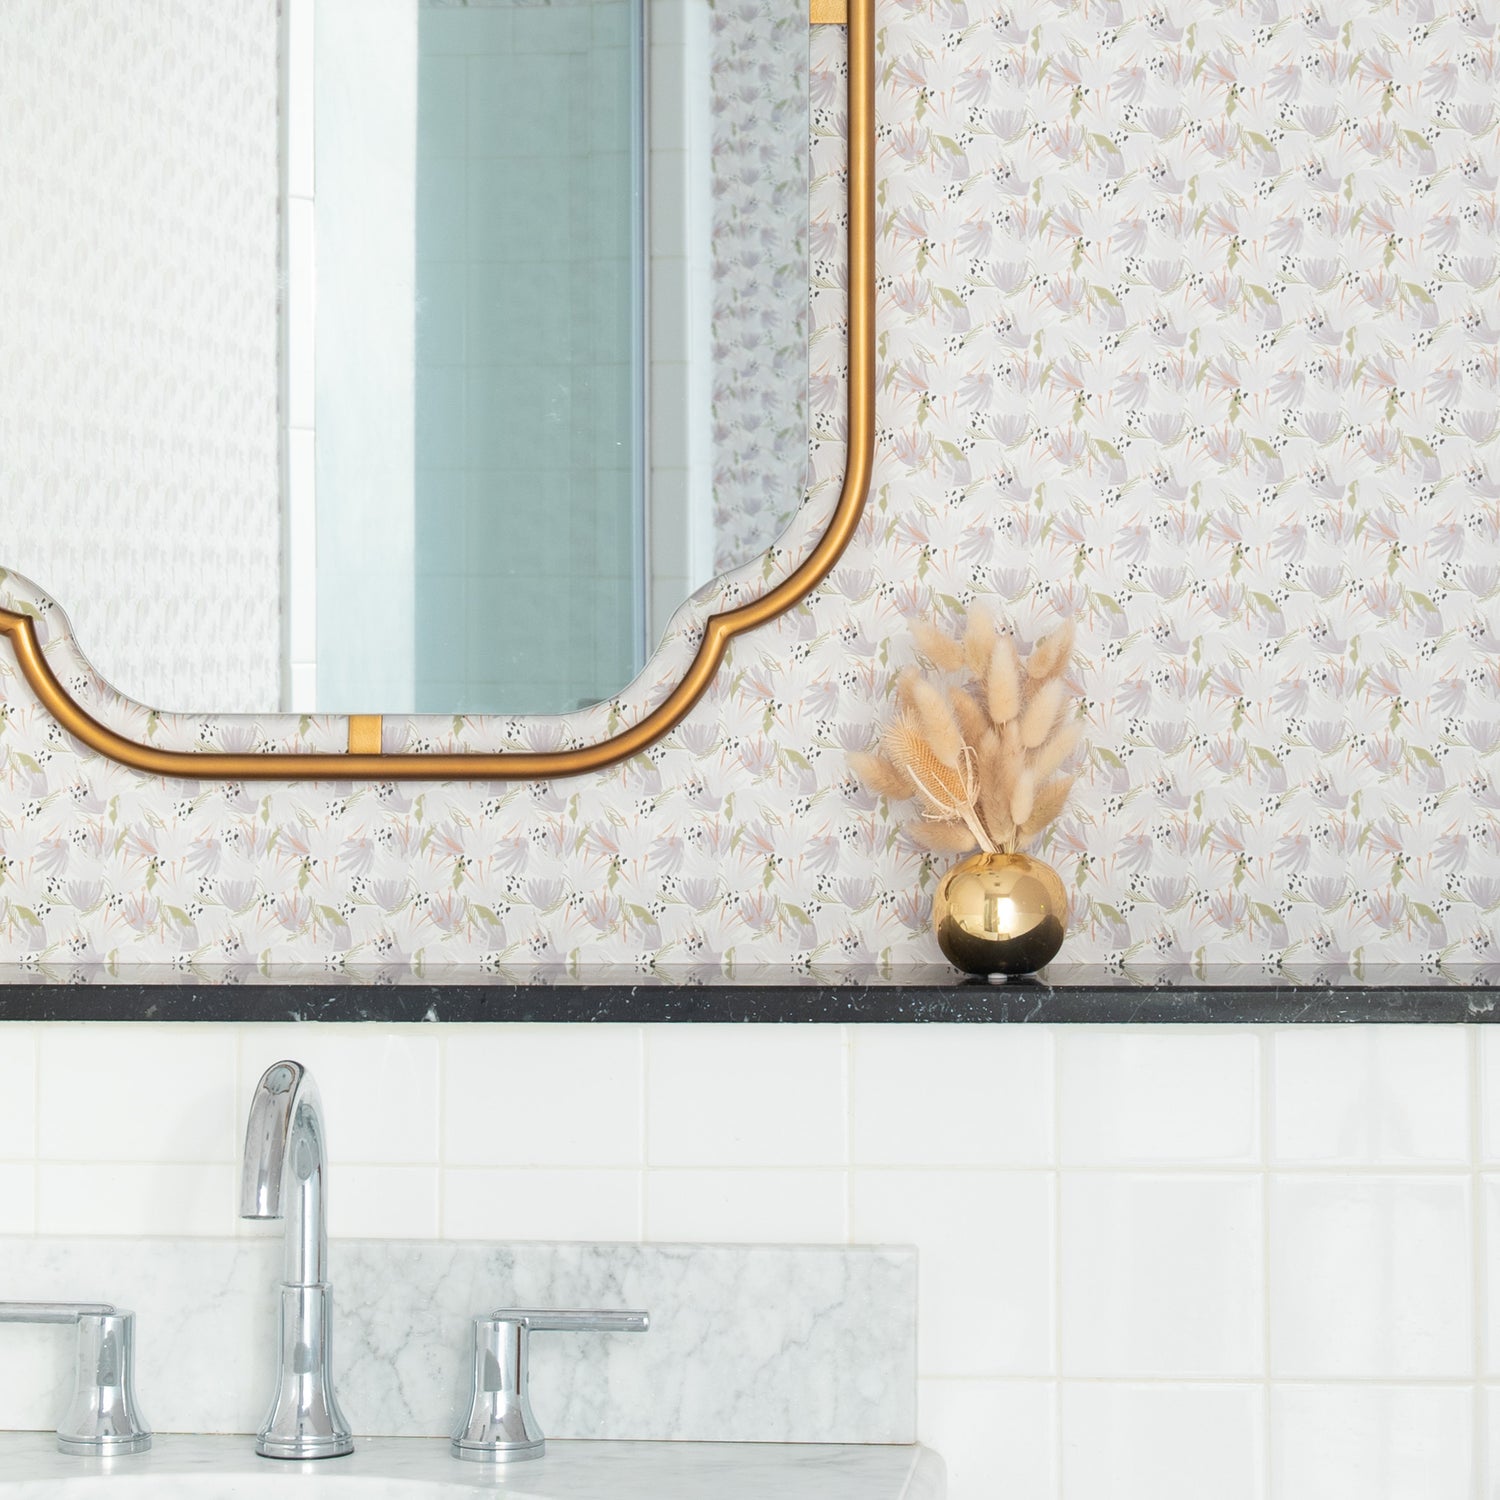 Bathroom styled with gold mirror on Grey Floral Printed Wallpaper with decorations in gold vase on black marble counter on top of silver sink with grey marble